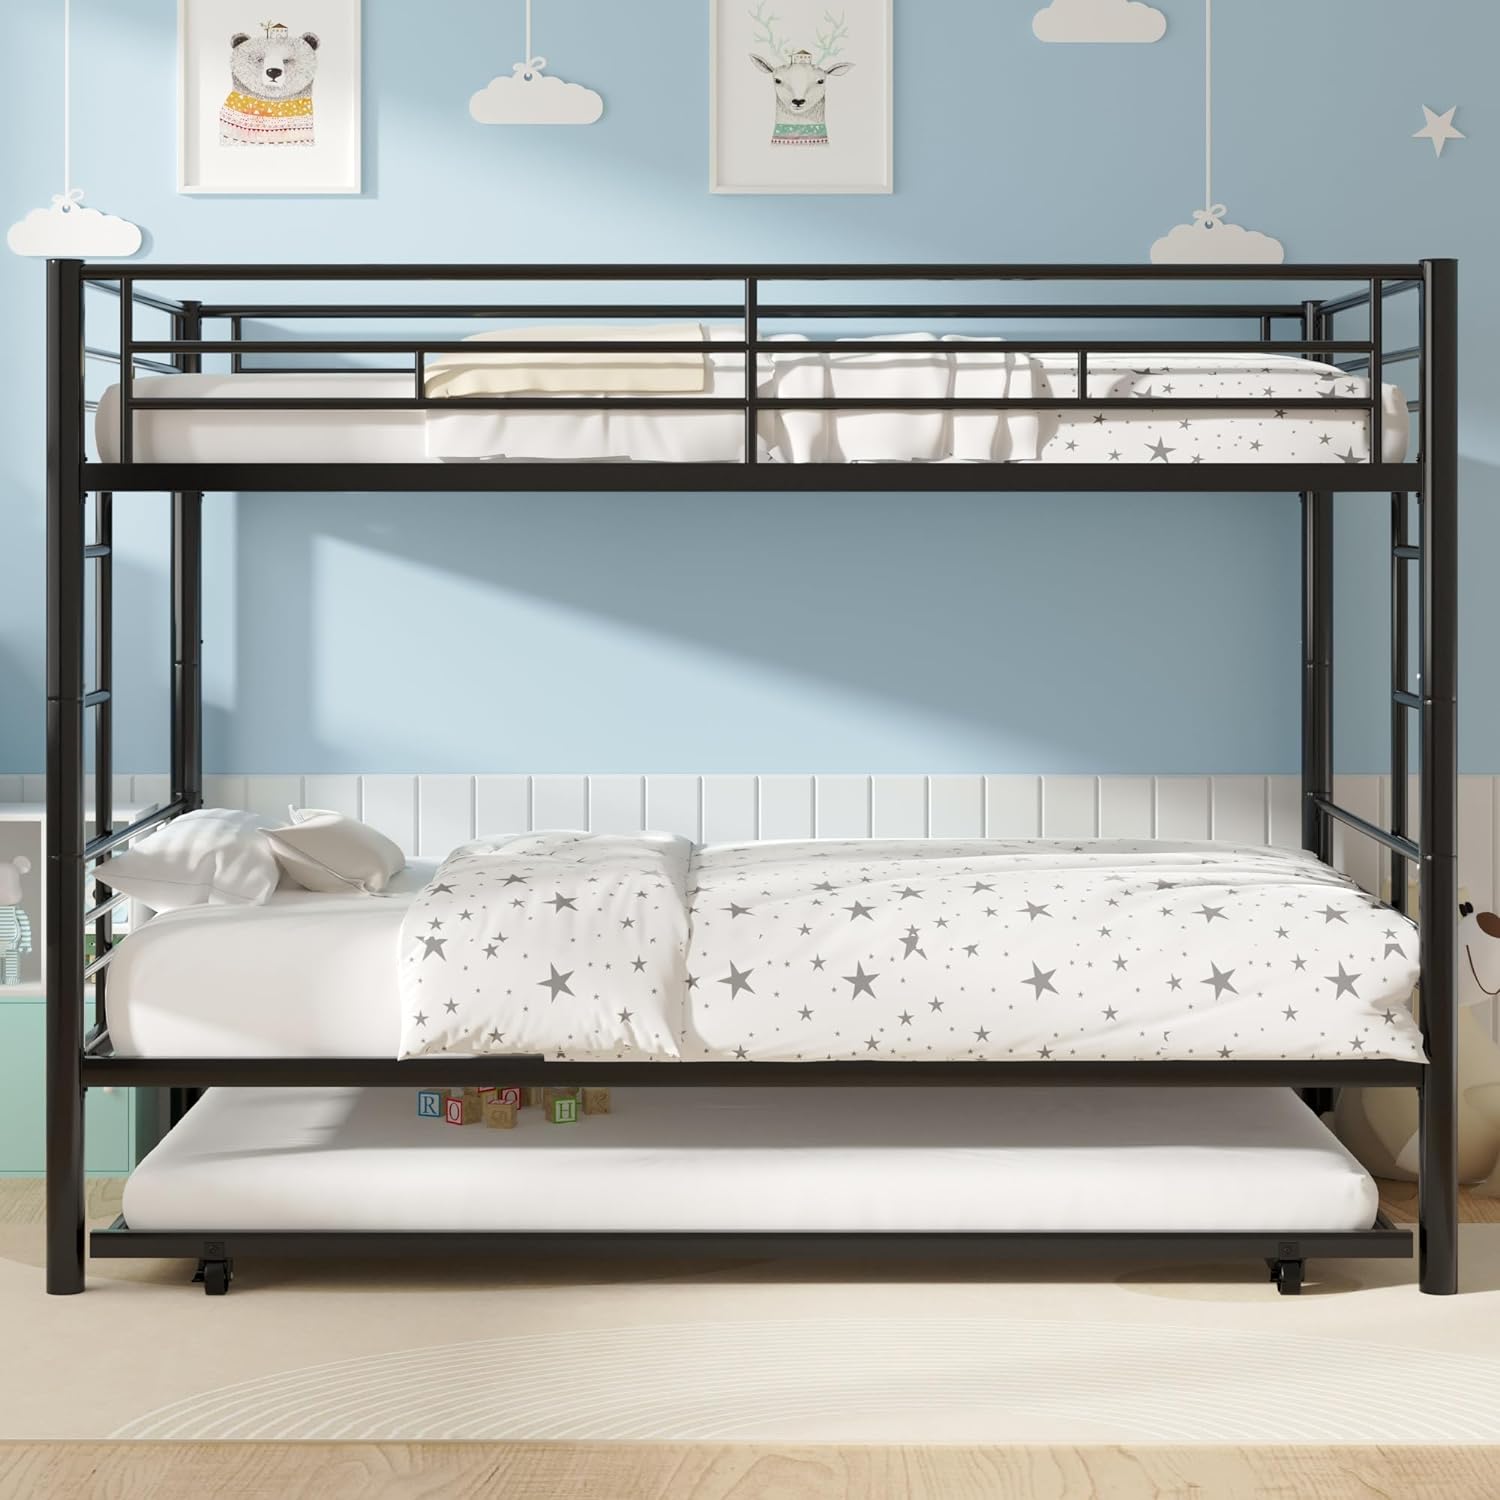 VECELO Bunk Bed Twin Over Twin with Trundle, Metal Bunkbeds with Ladder and Full-Length Guardrail